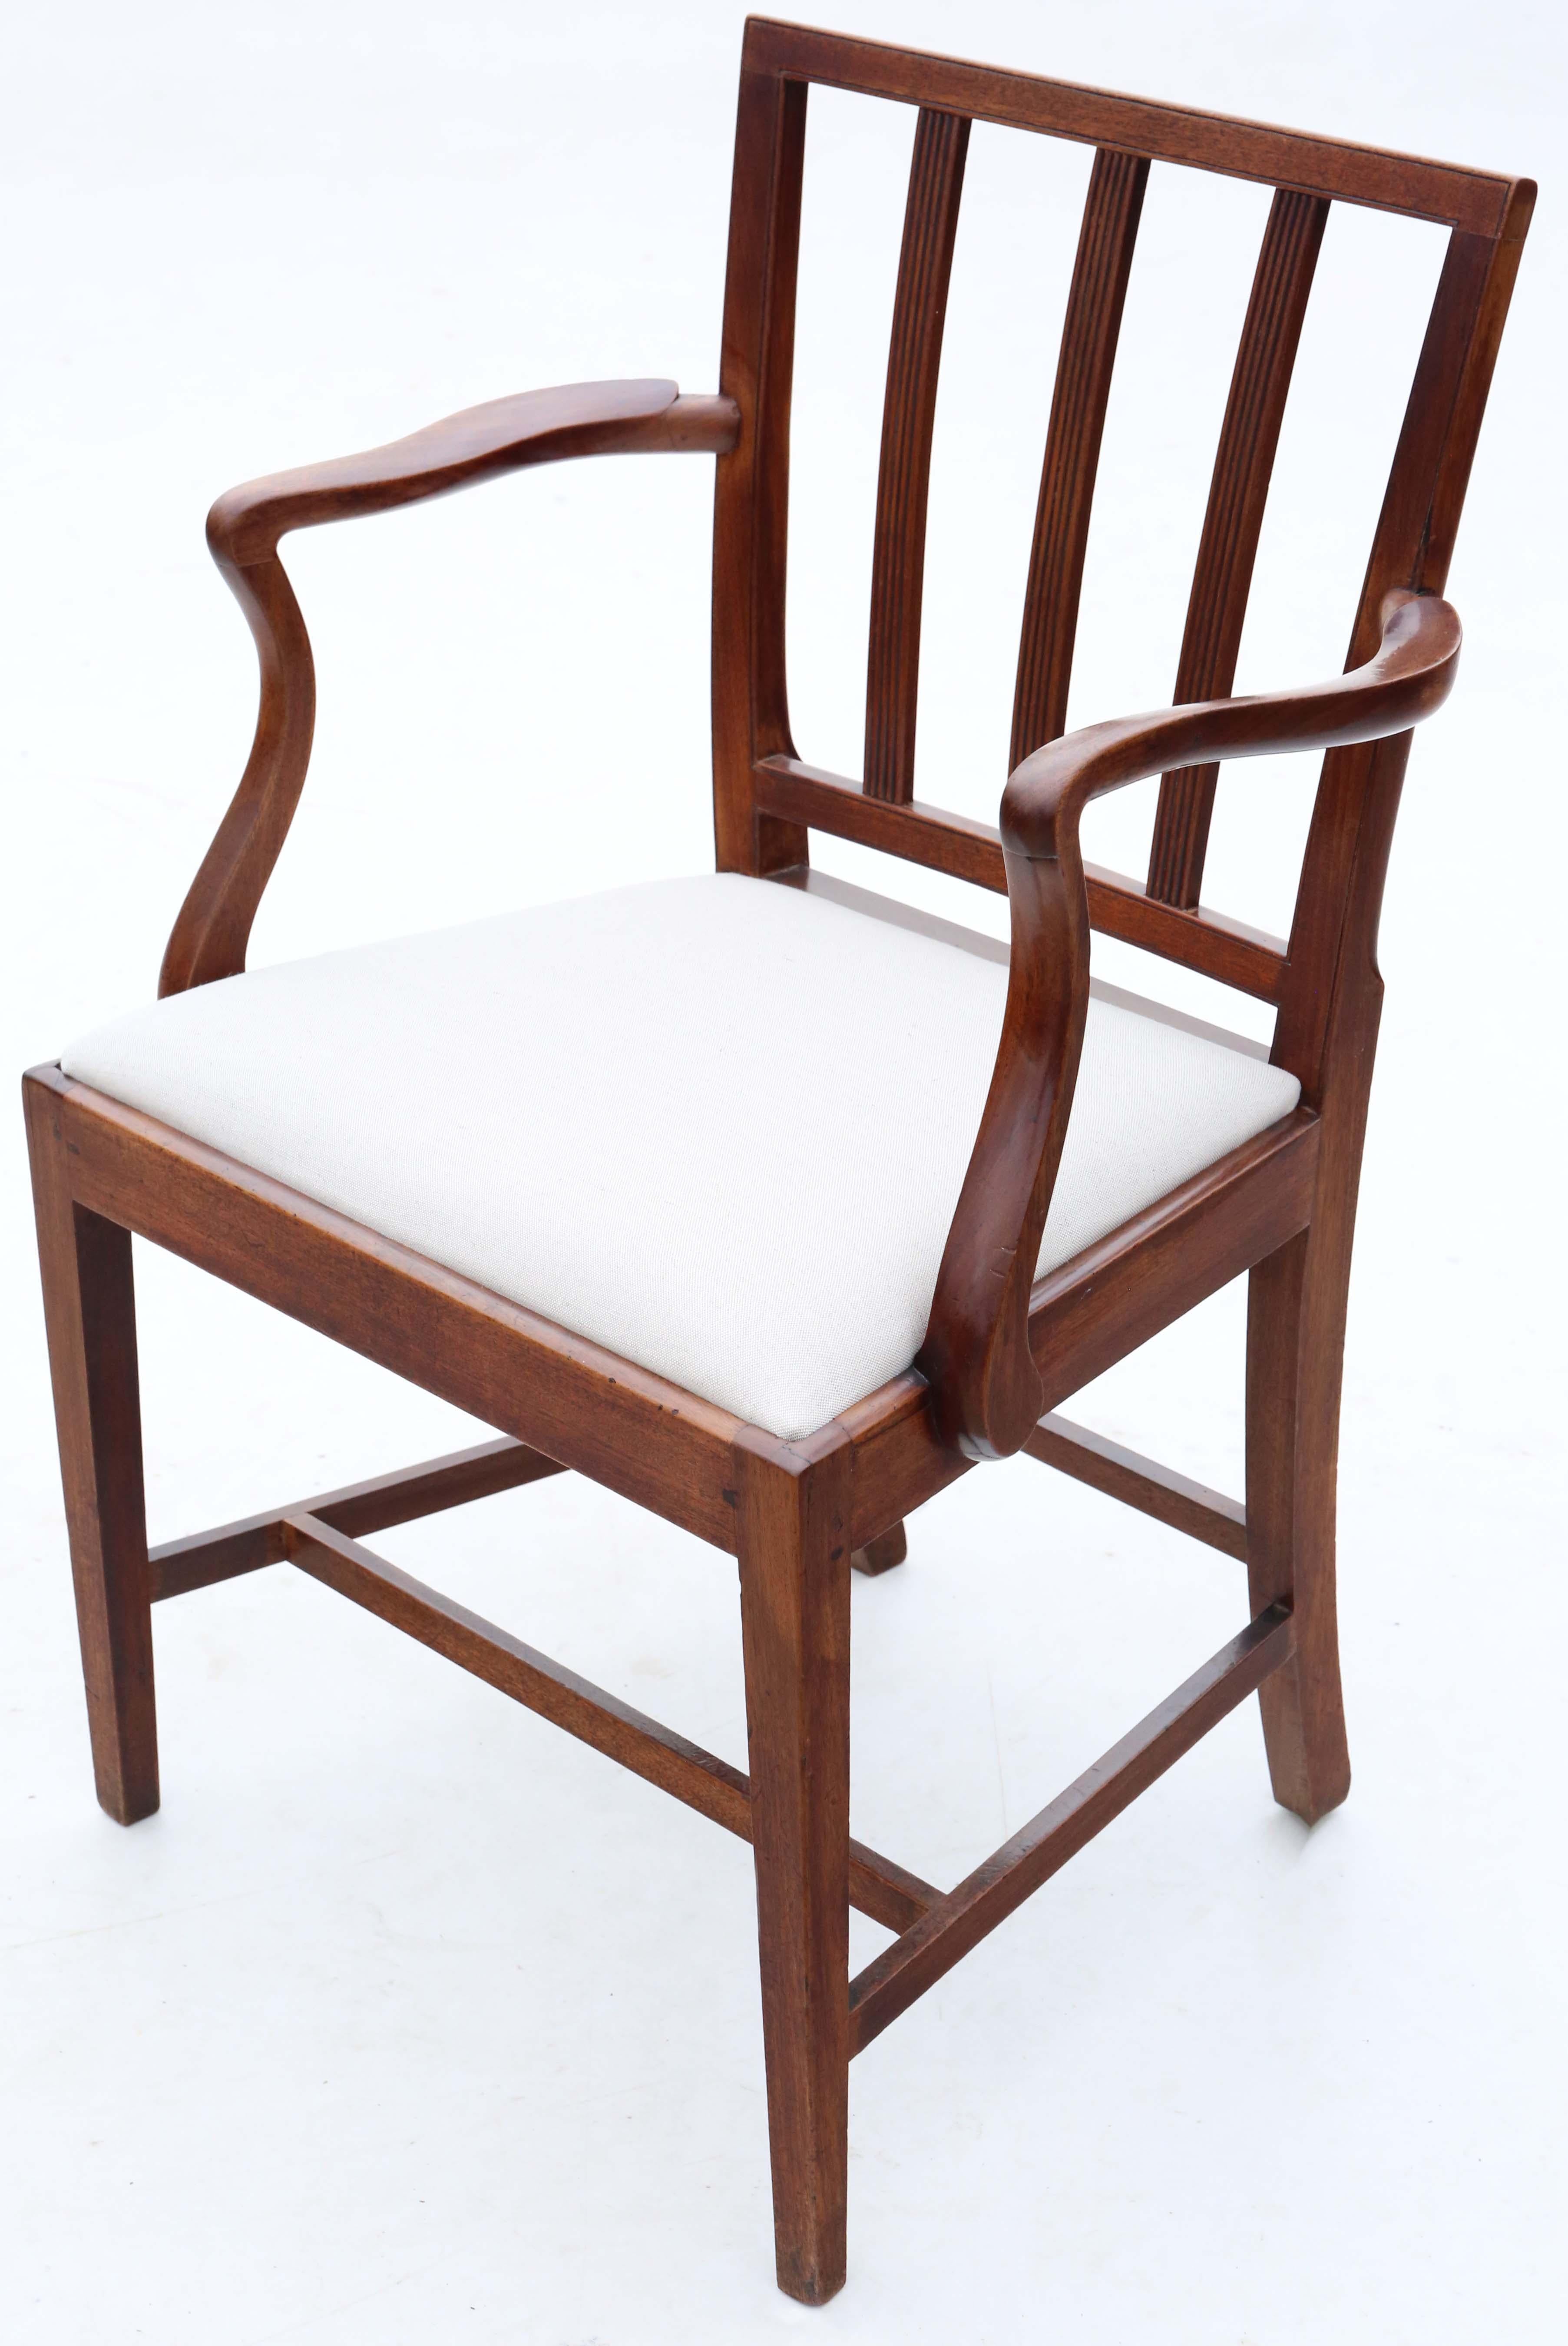 Wood Regency Mahogany Dining Chairs: Set of 8 (6+2), Antique Quality, Early 19th C